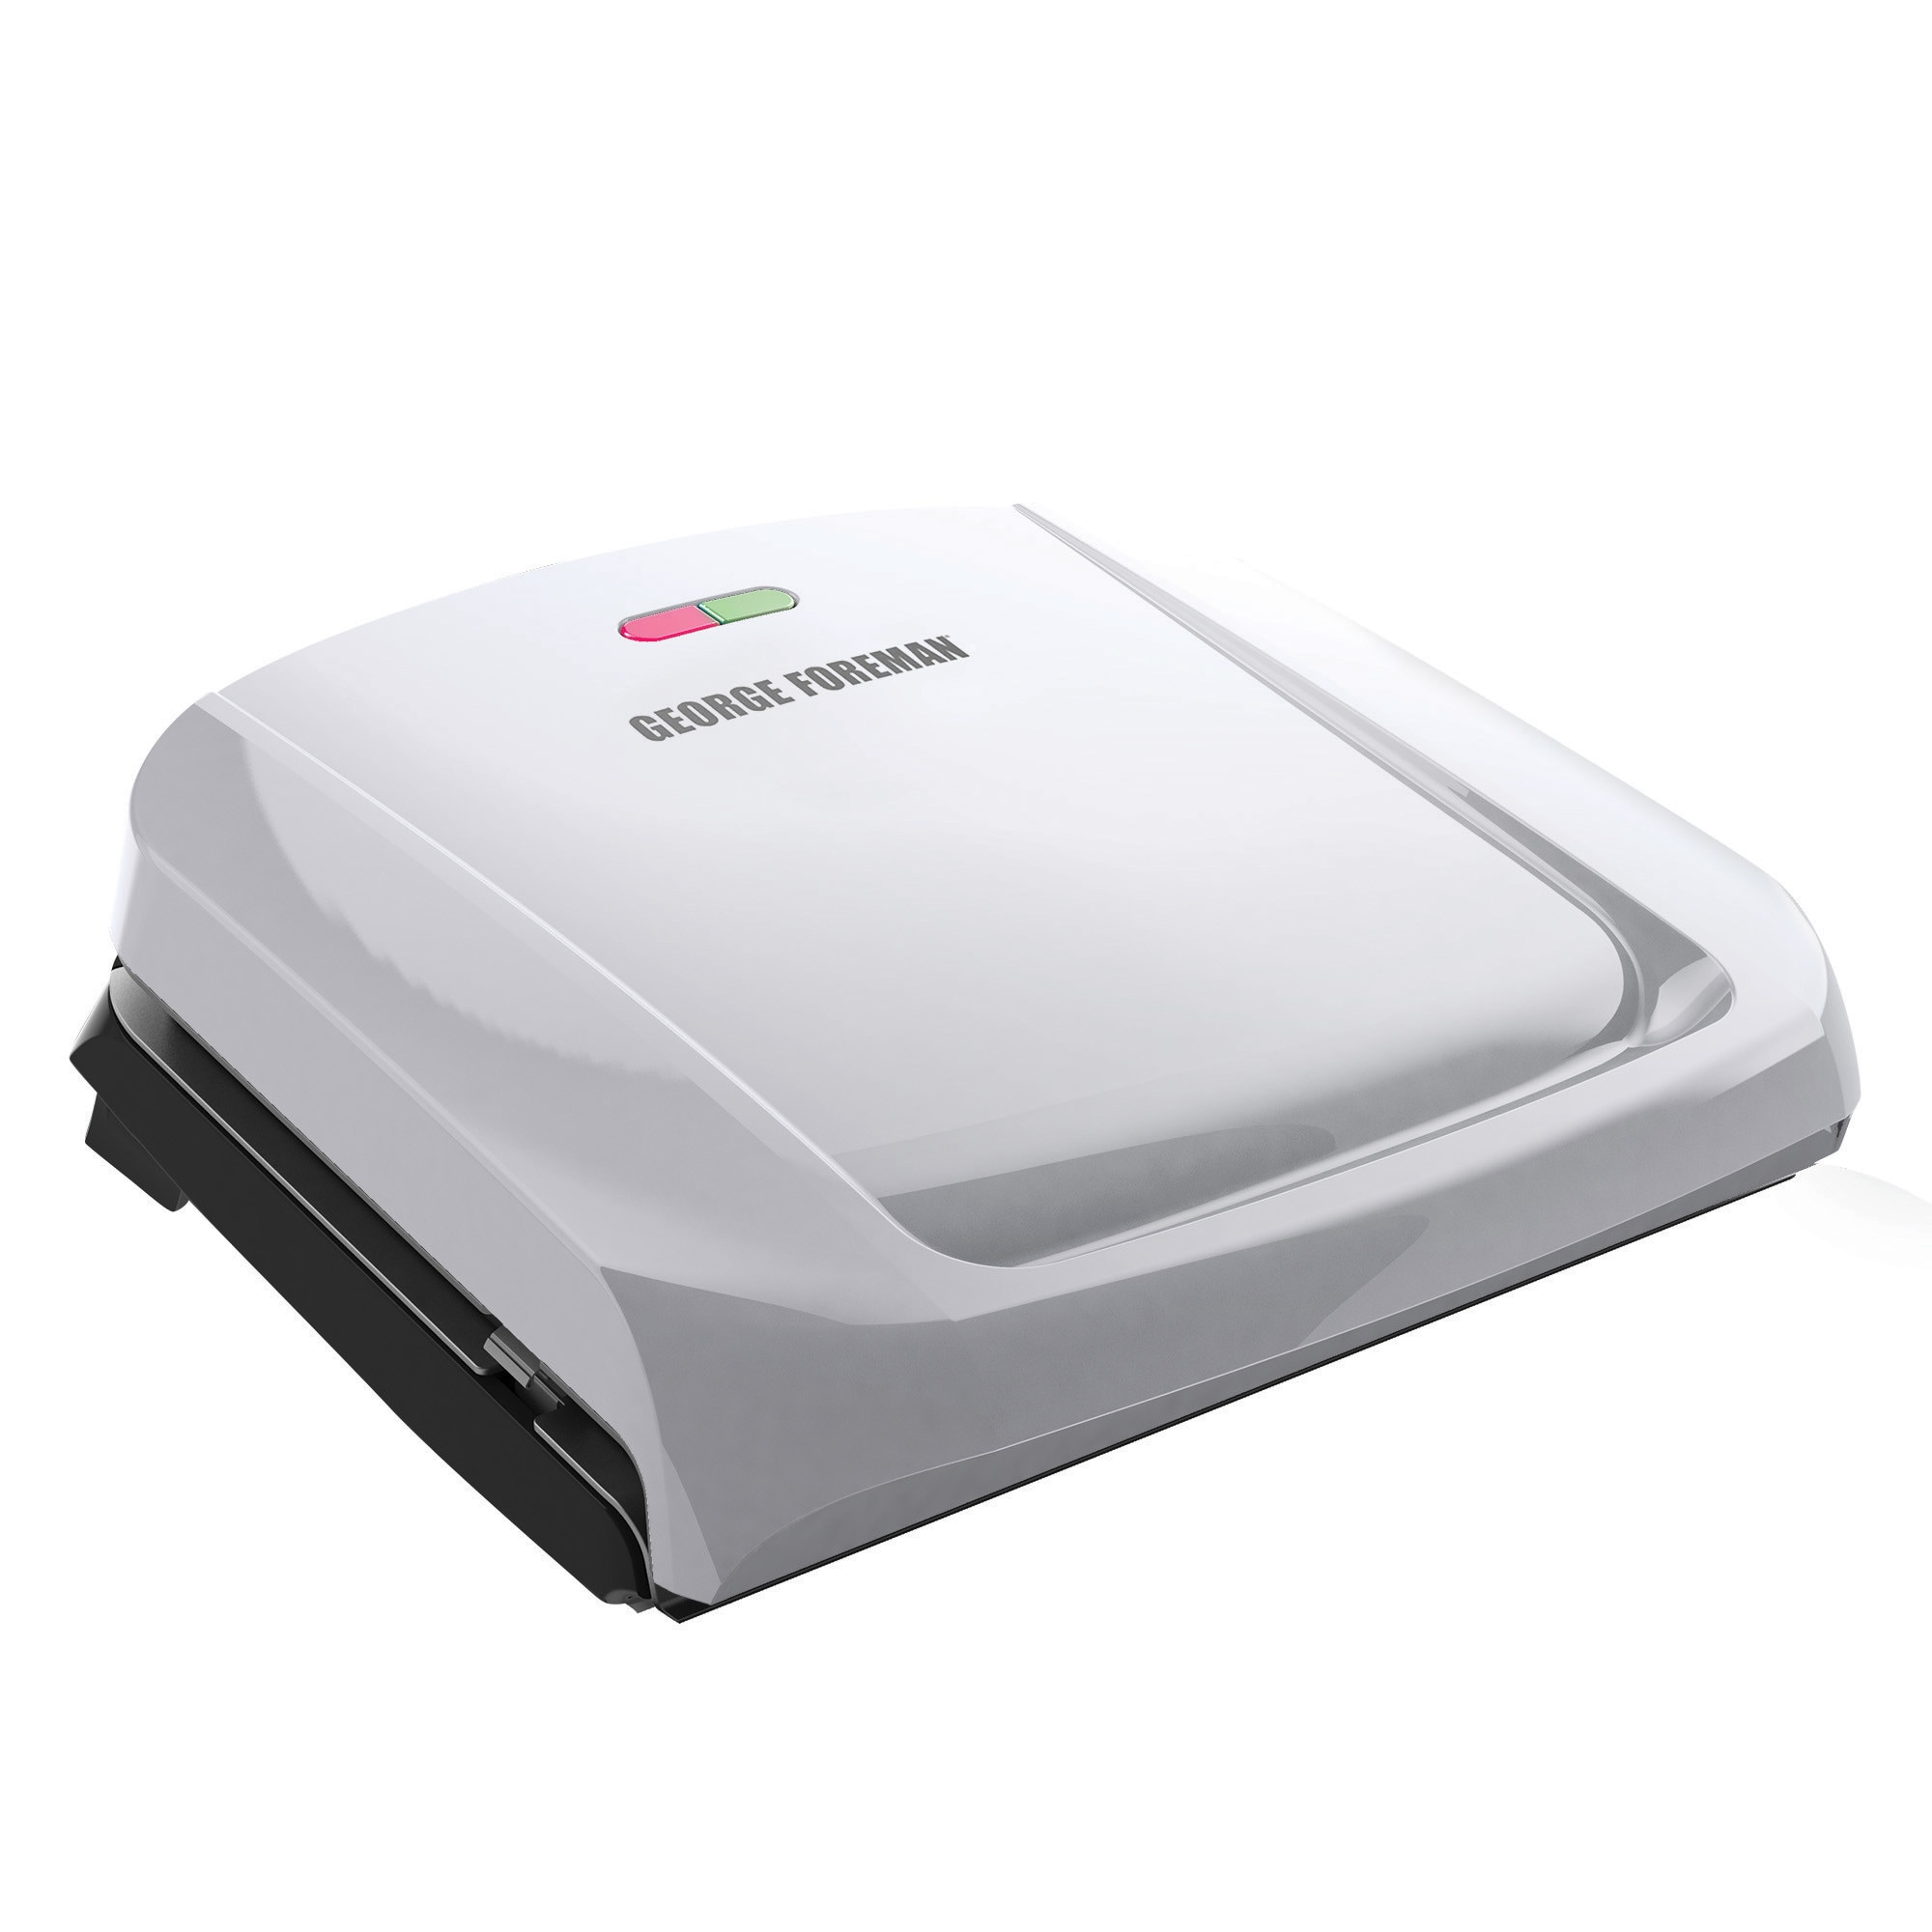 George Foreman 9.2-in L x 6.69-in W Non-Stick Residential in the 